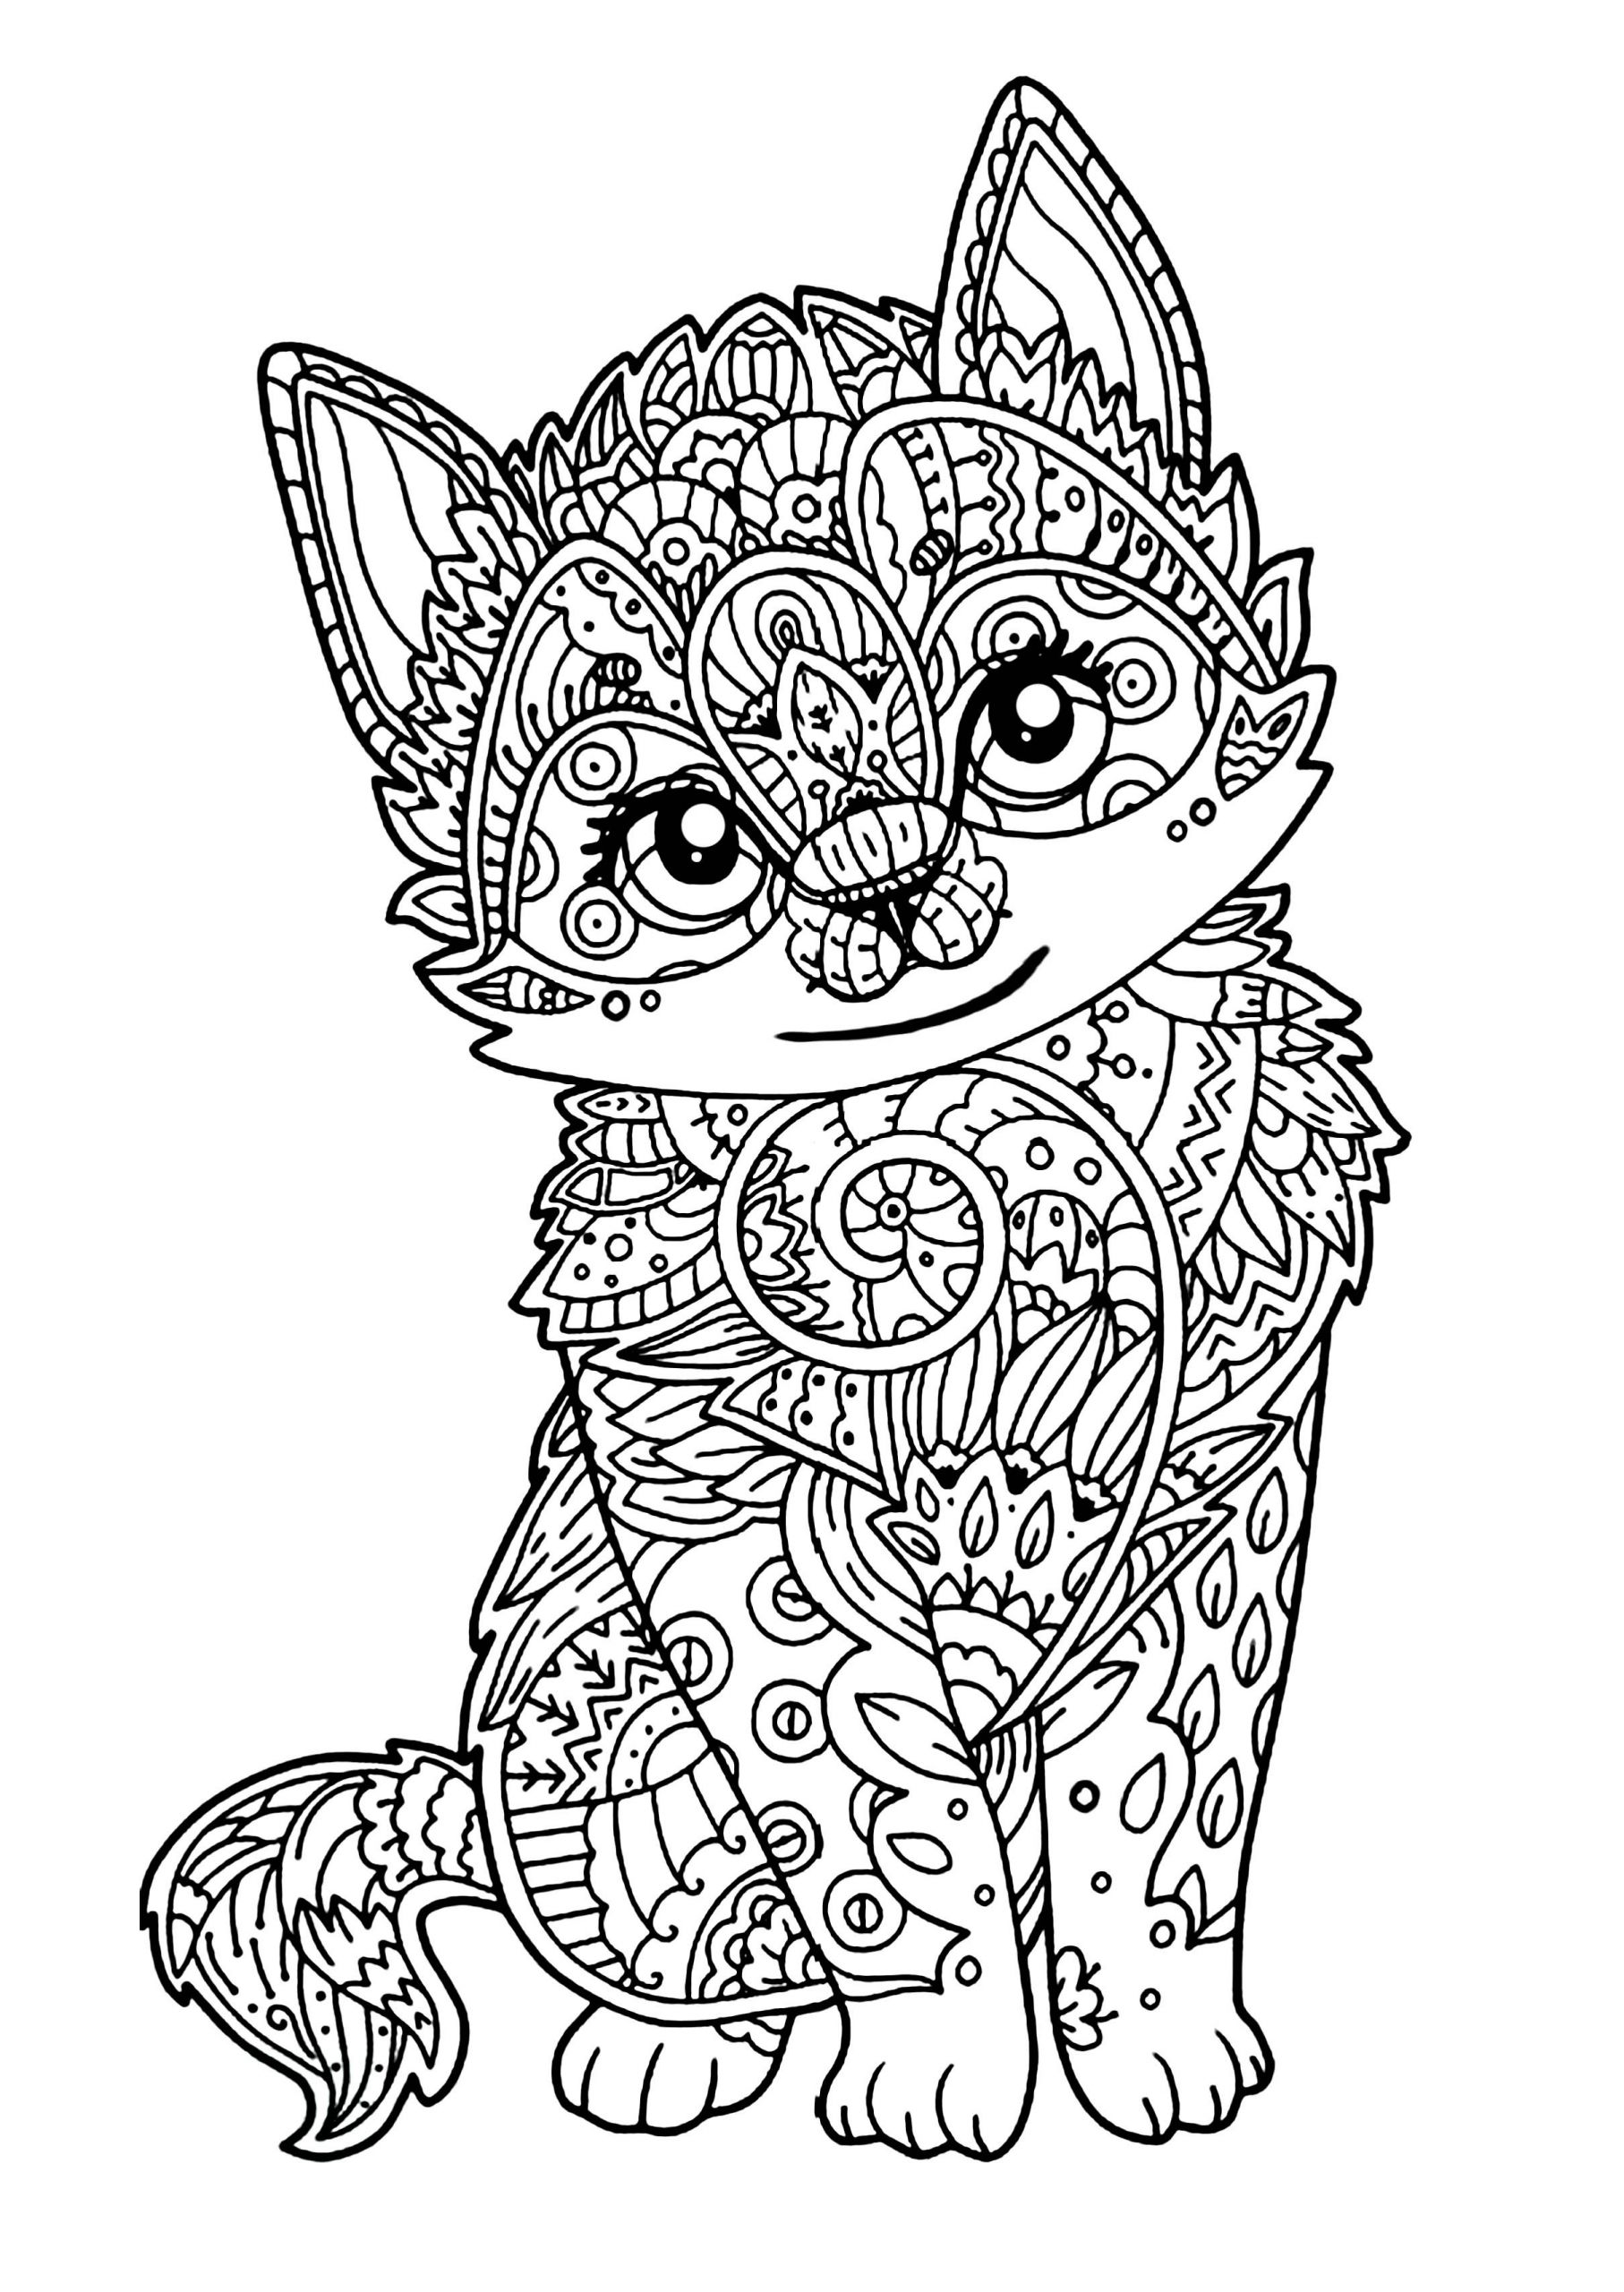 Animal Coloring Pages For Adults
 Cute kitten Cats Adult Coloring Pages